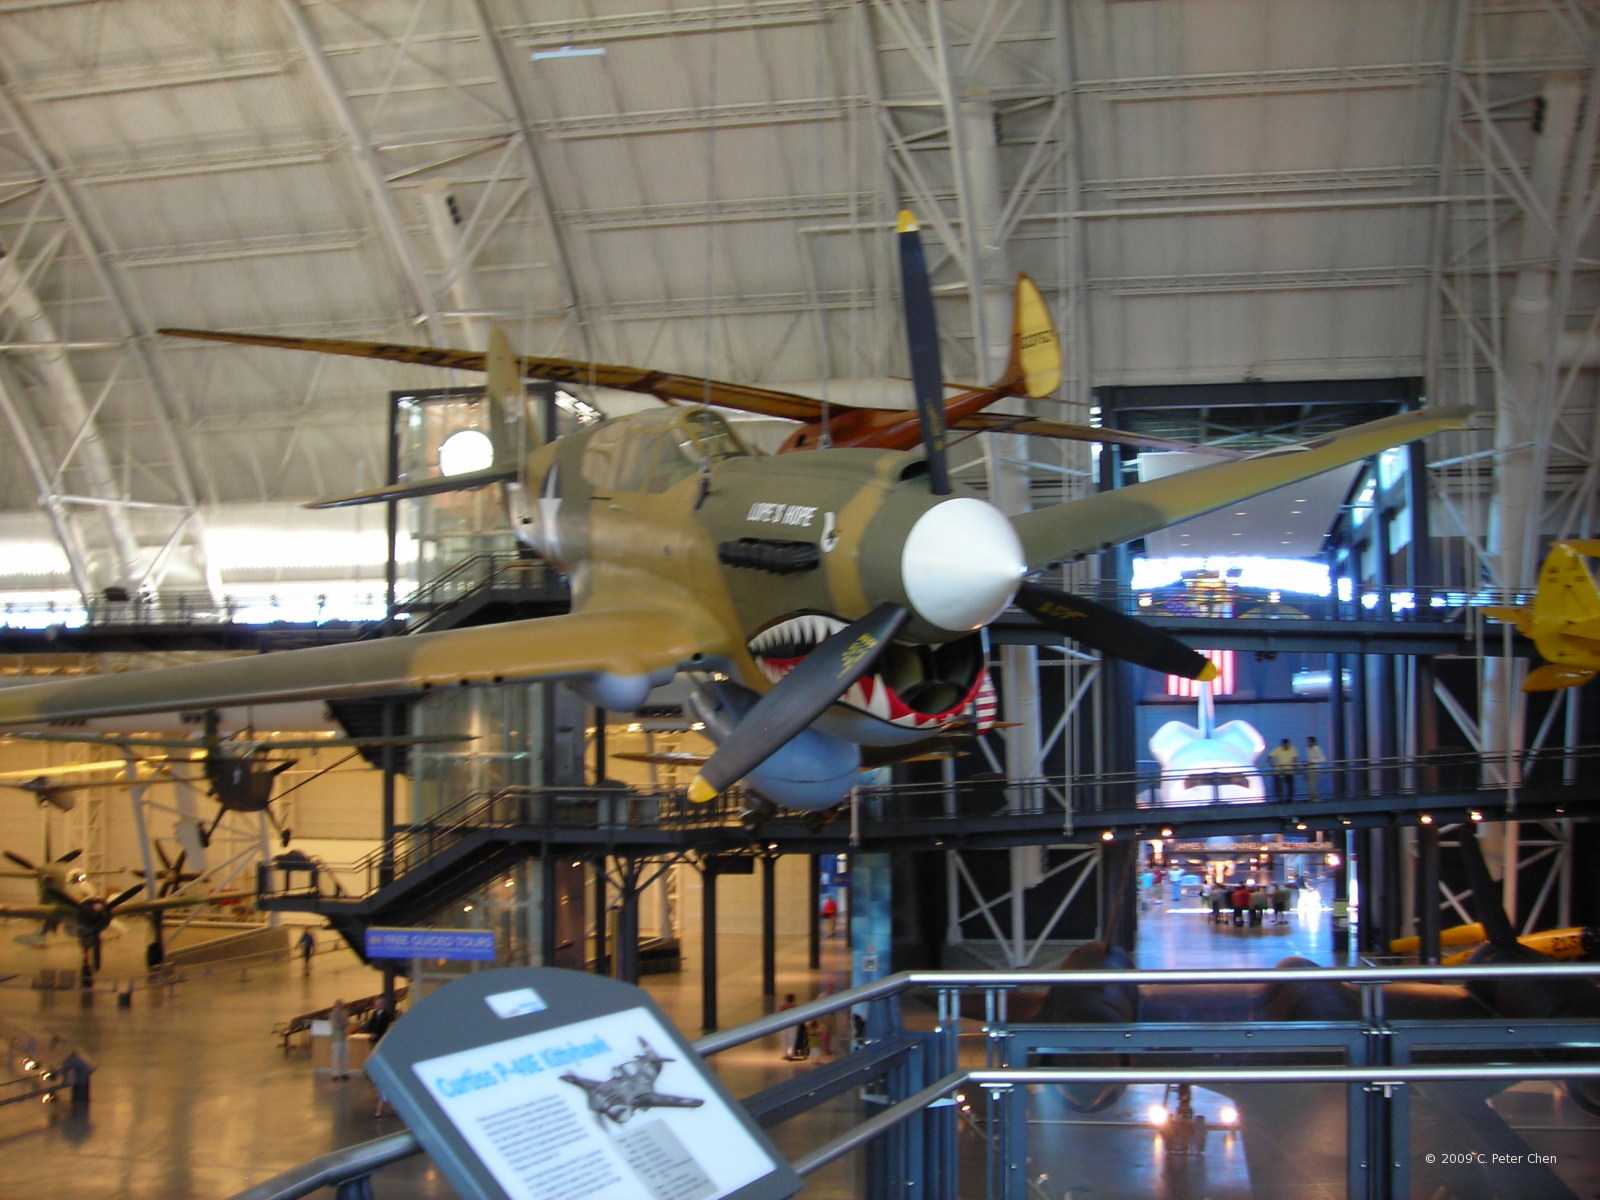 P-40E Warhawk fighter on display at Smithsonian Air and Space Museum Udvar-Hazy Center, Chantilly, Virginia, United States, 26 Apr 2009; note L-5 Sentinel and Do 335 Pfeil aircraft in background